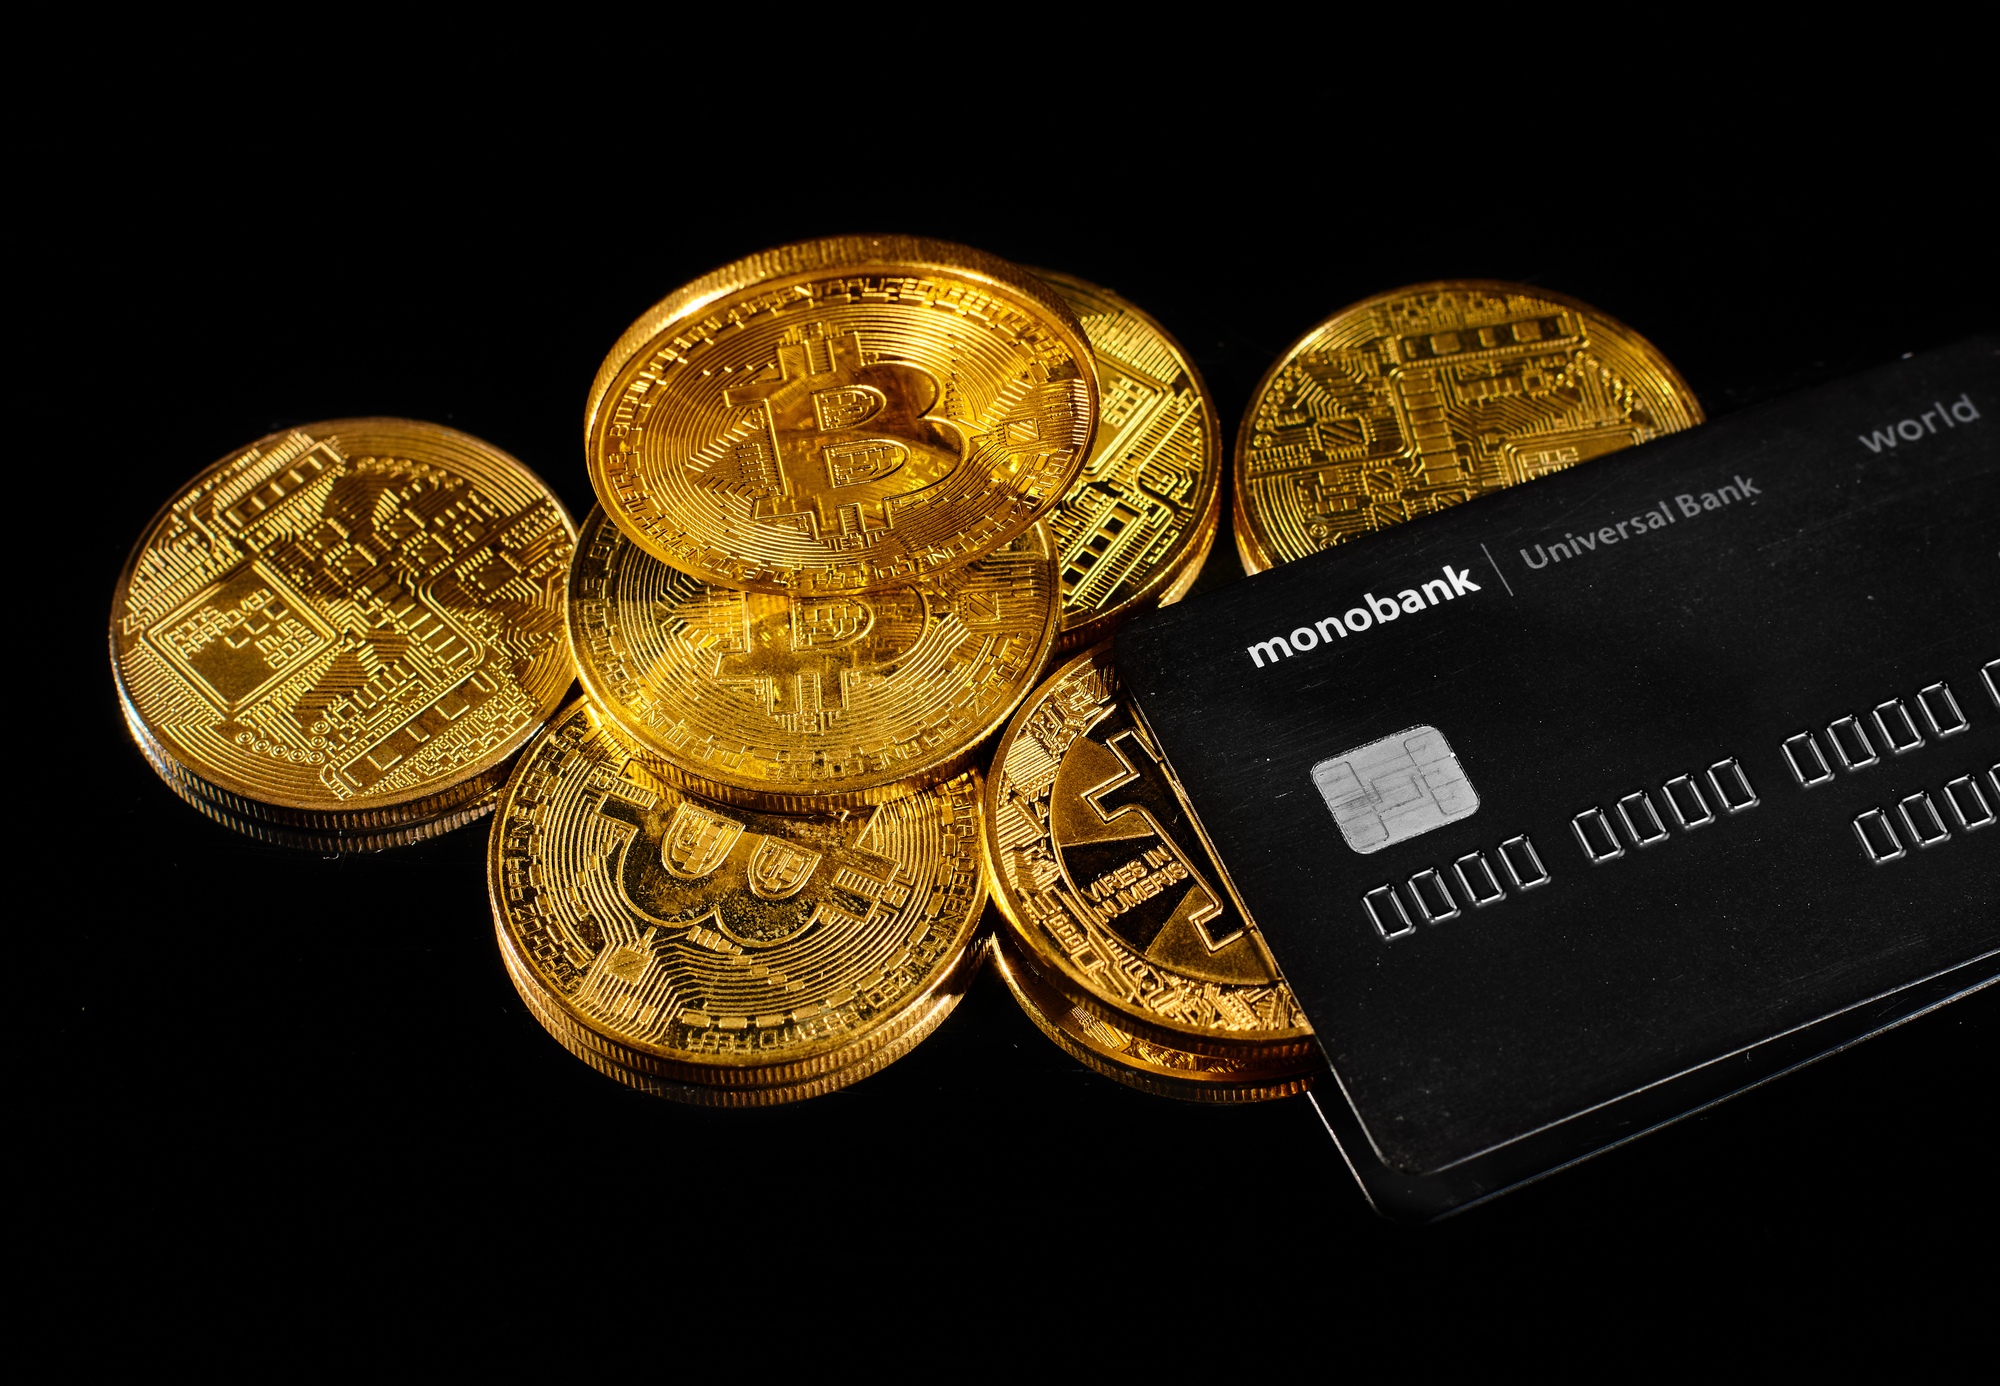 Lutsk, Ukraine - May 1, 2021: Golden coin with bitcoin logo and credit card by monobank. Crypto currency BTC and bitcoin rewards card by Universal bank. E-cash payment or digital electronic money